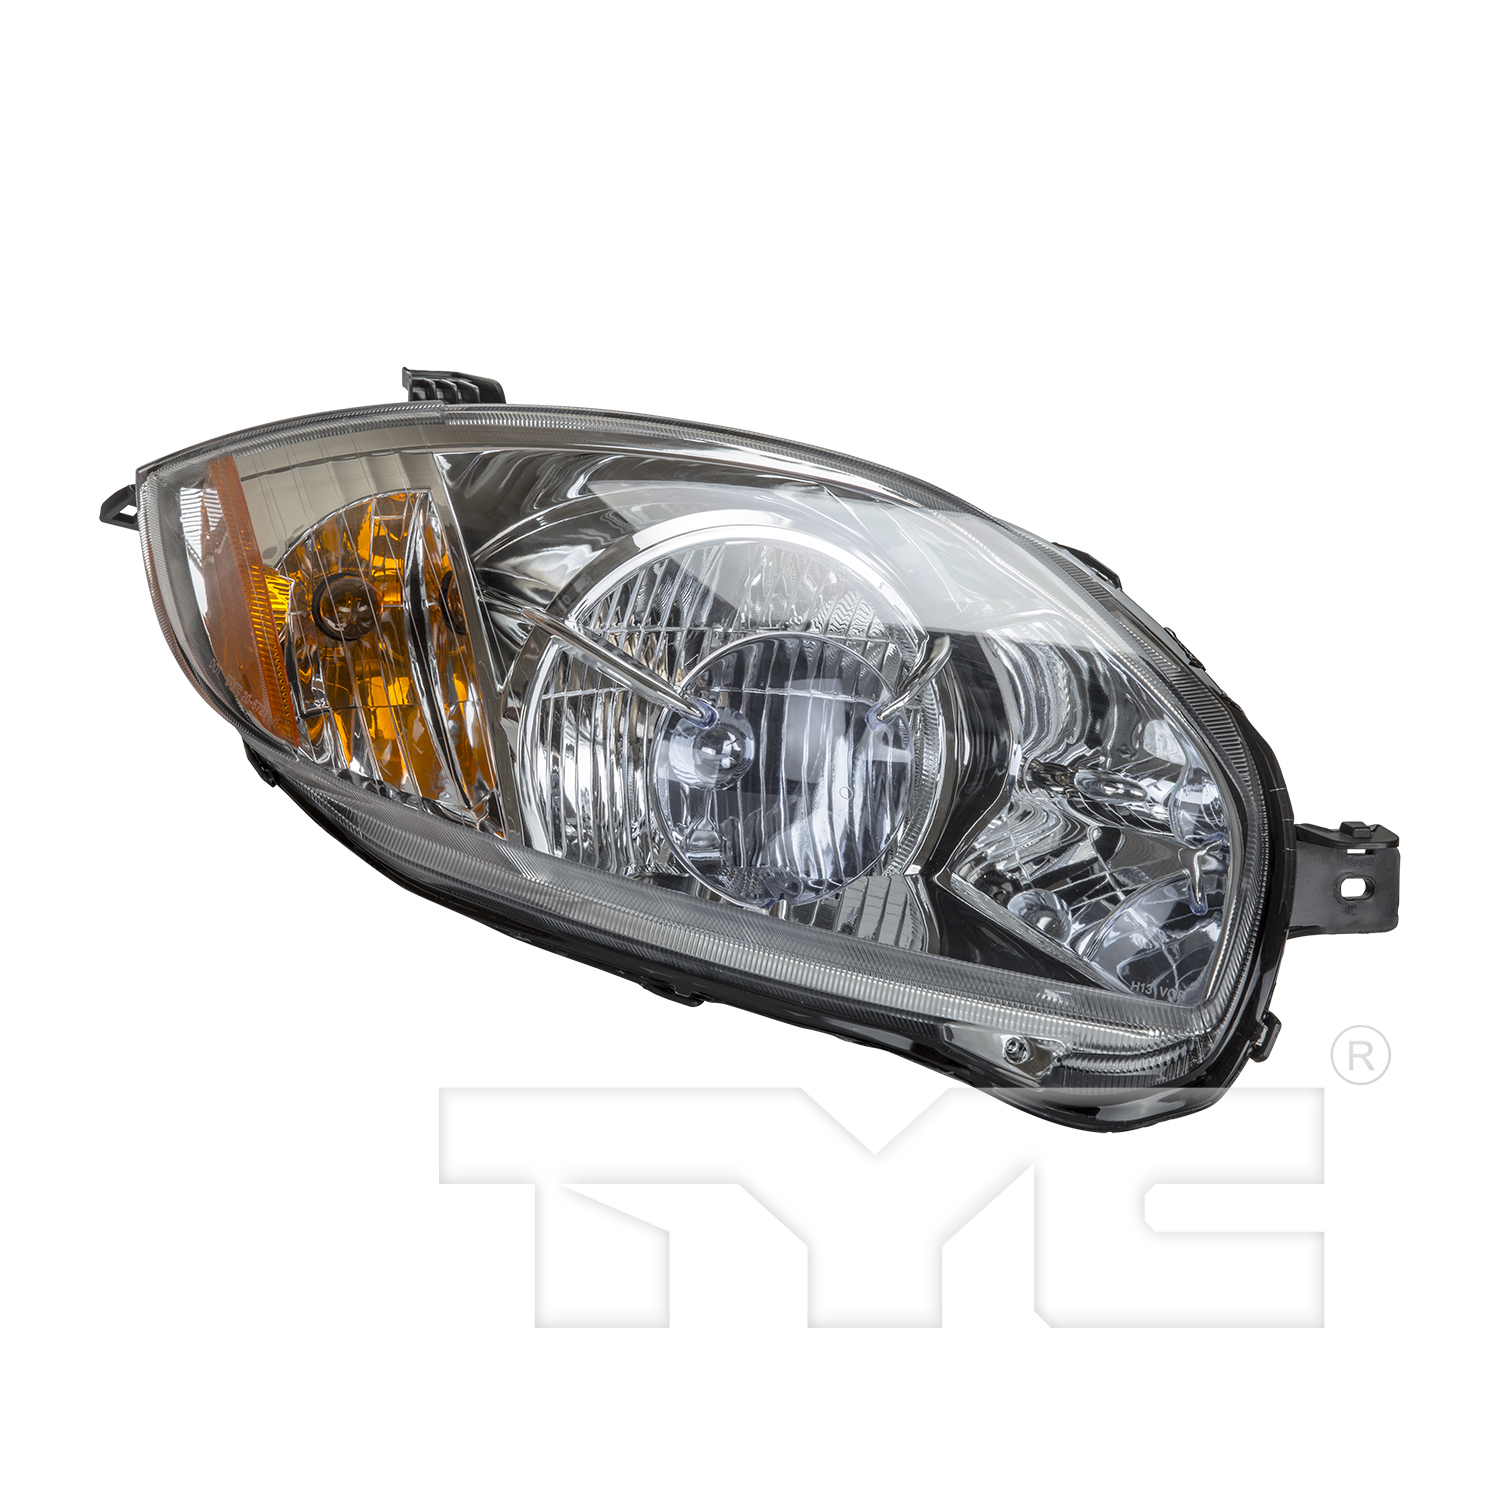 Aftermarket HEADLIGHTS for MITSUBISHI - ECLIPSE, ECLIPSE,07-08,RT Headlamp assy composite